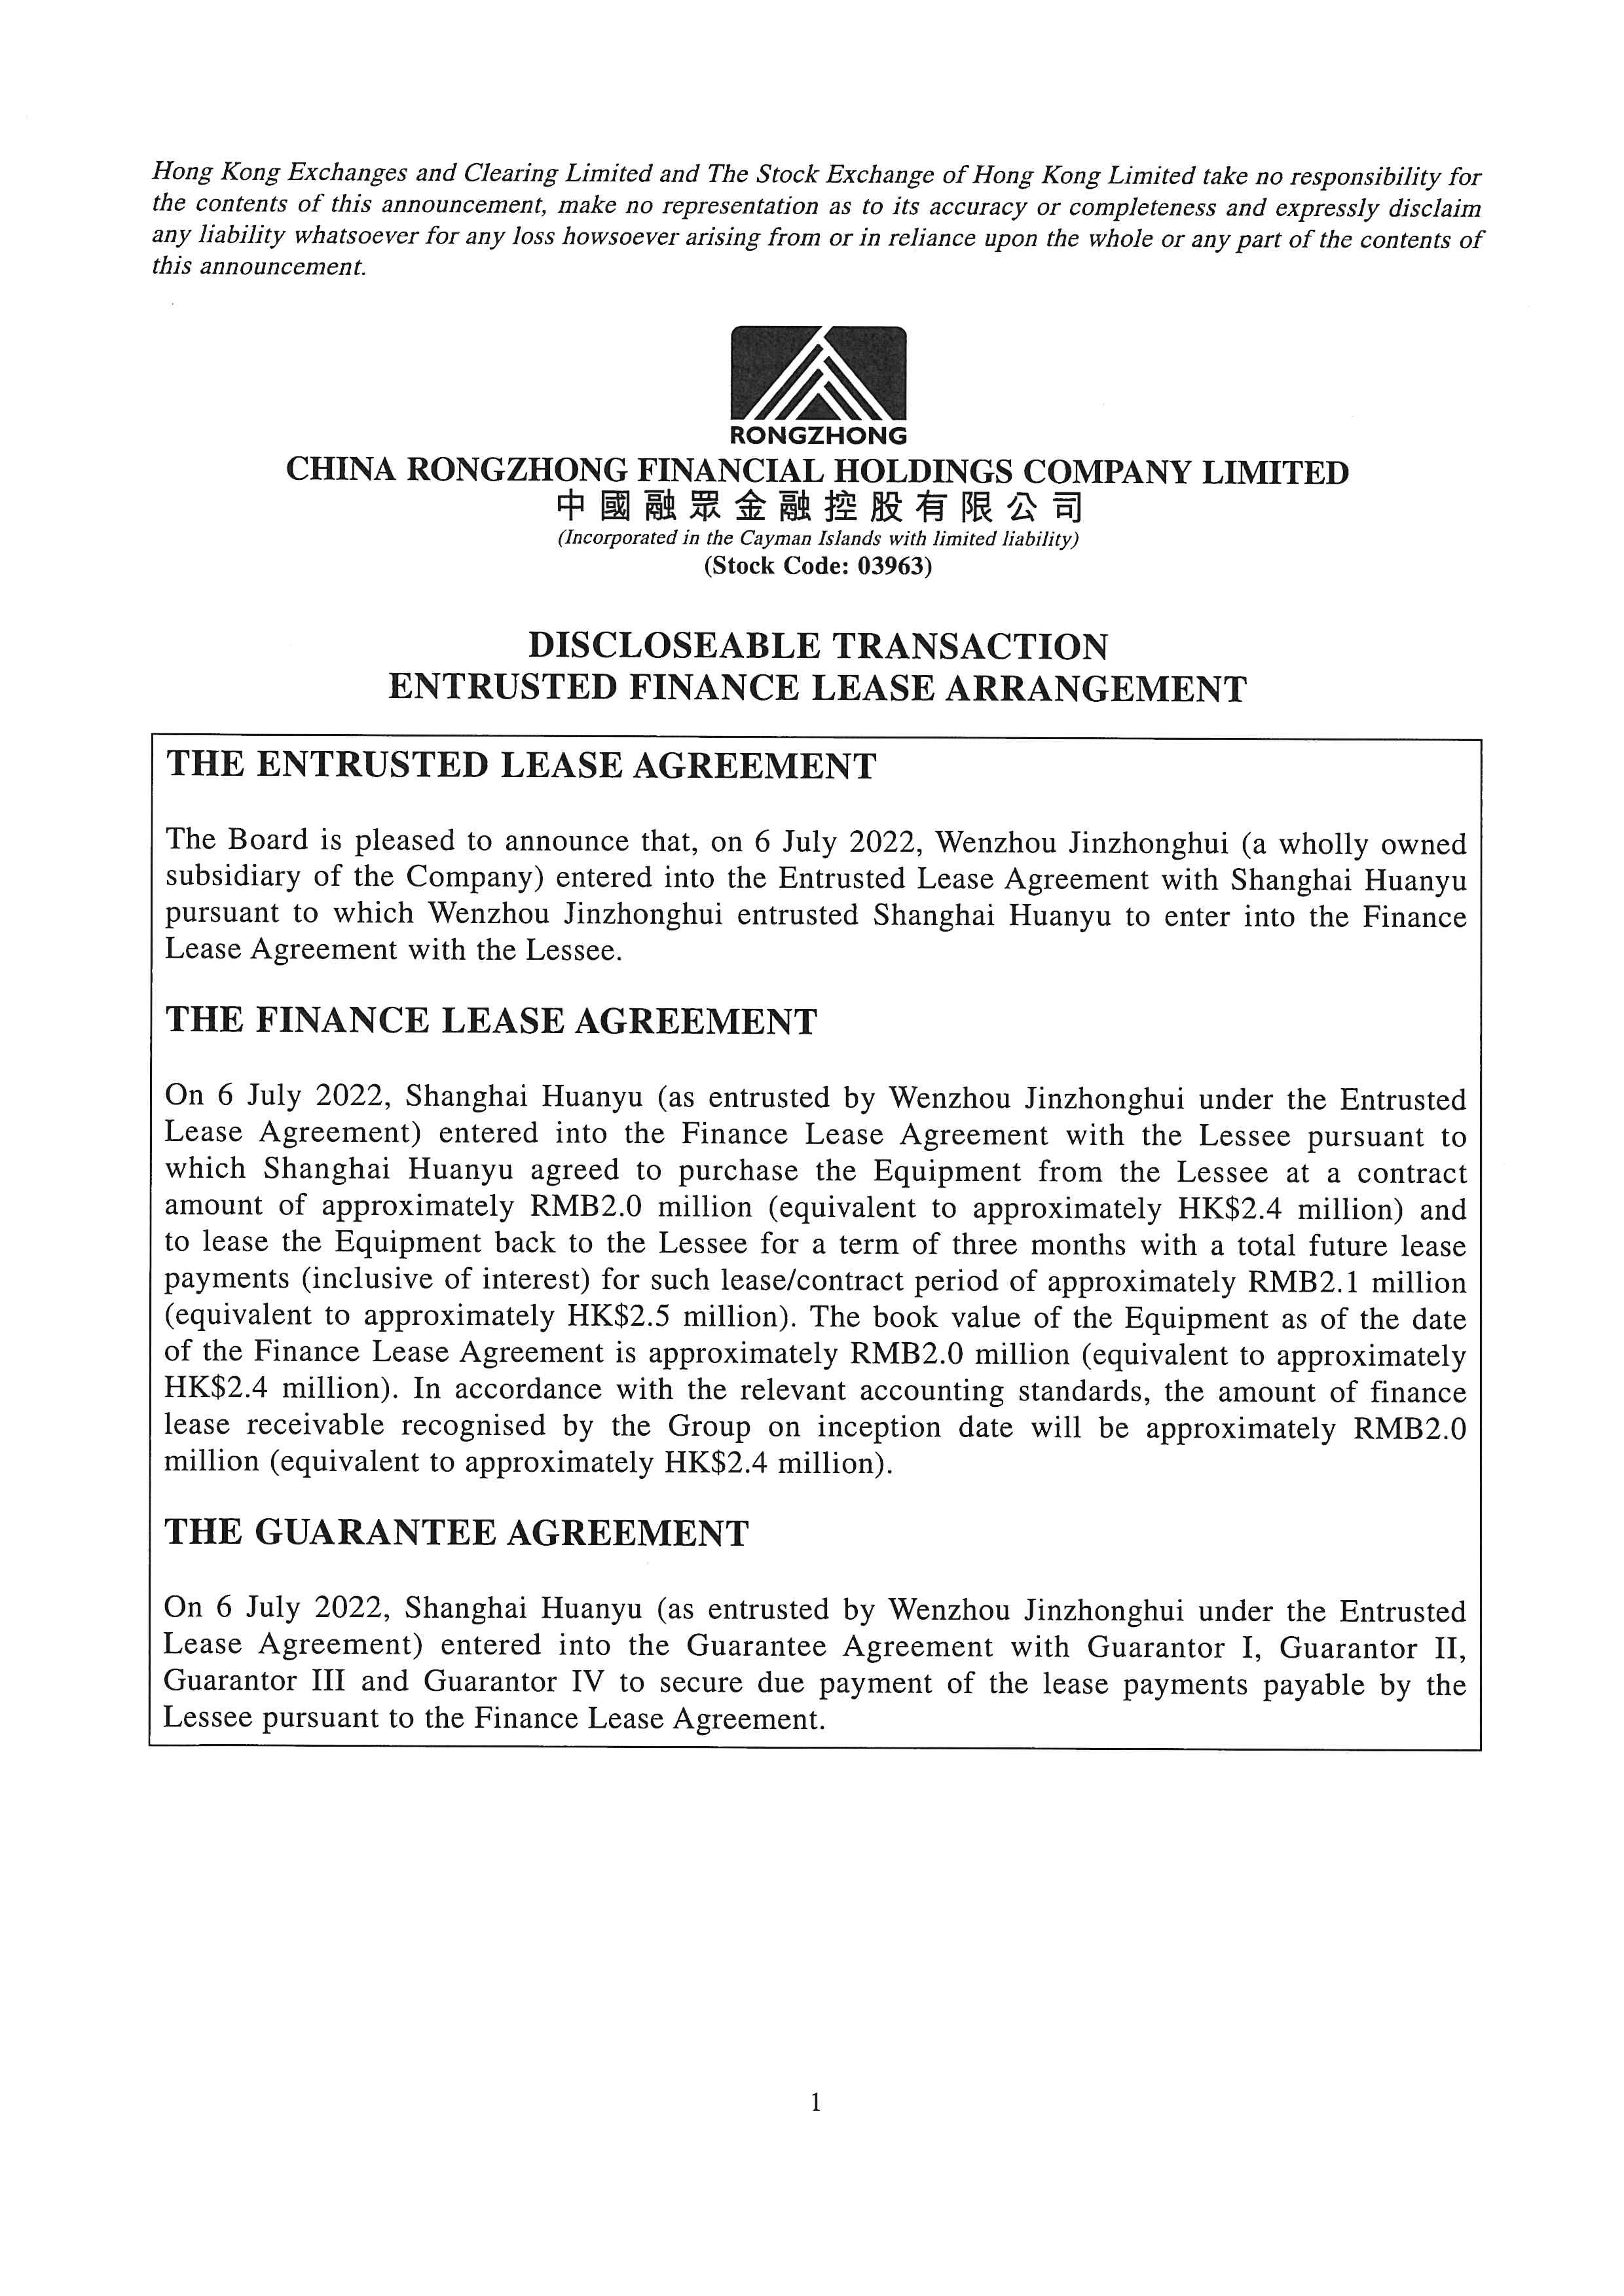 Announcements and Notices - [Discloseable Transaction]